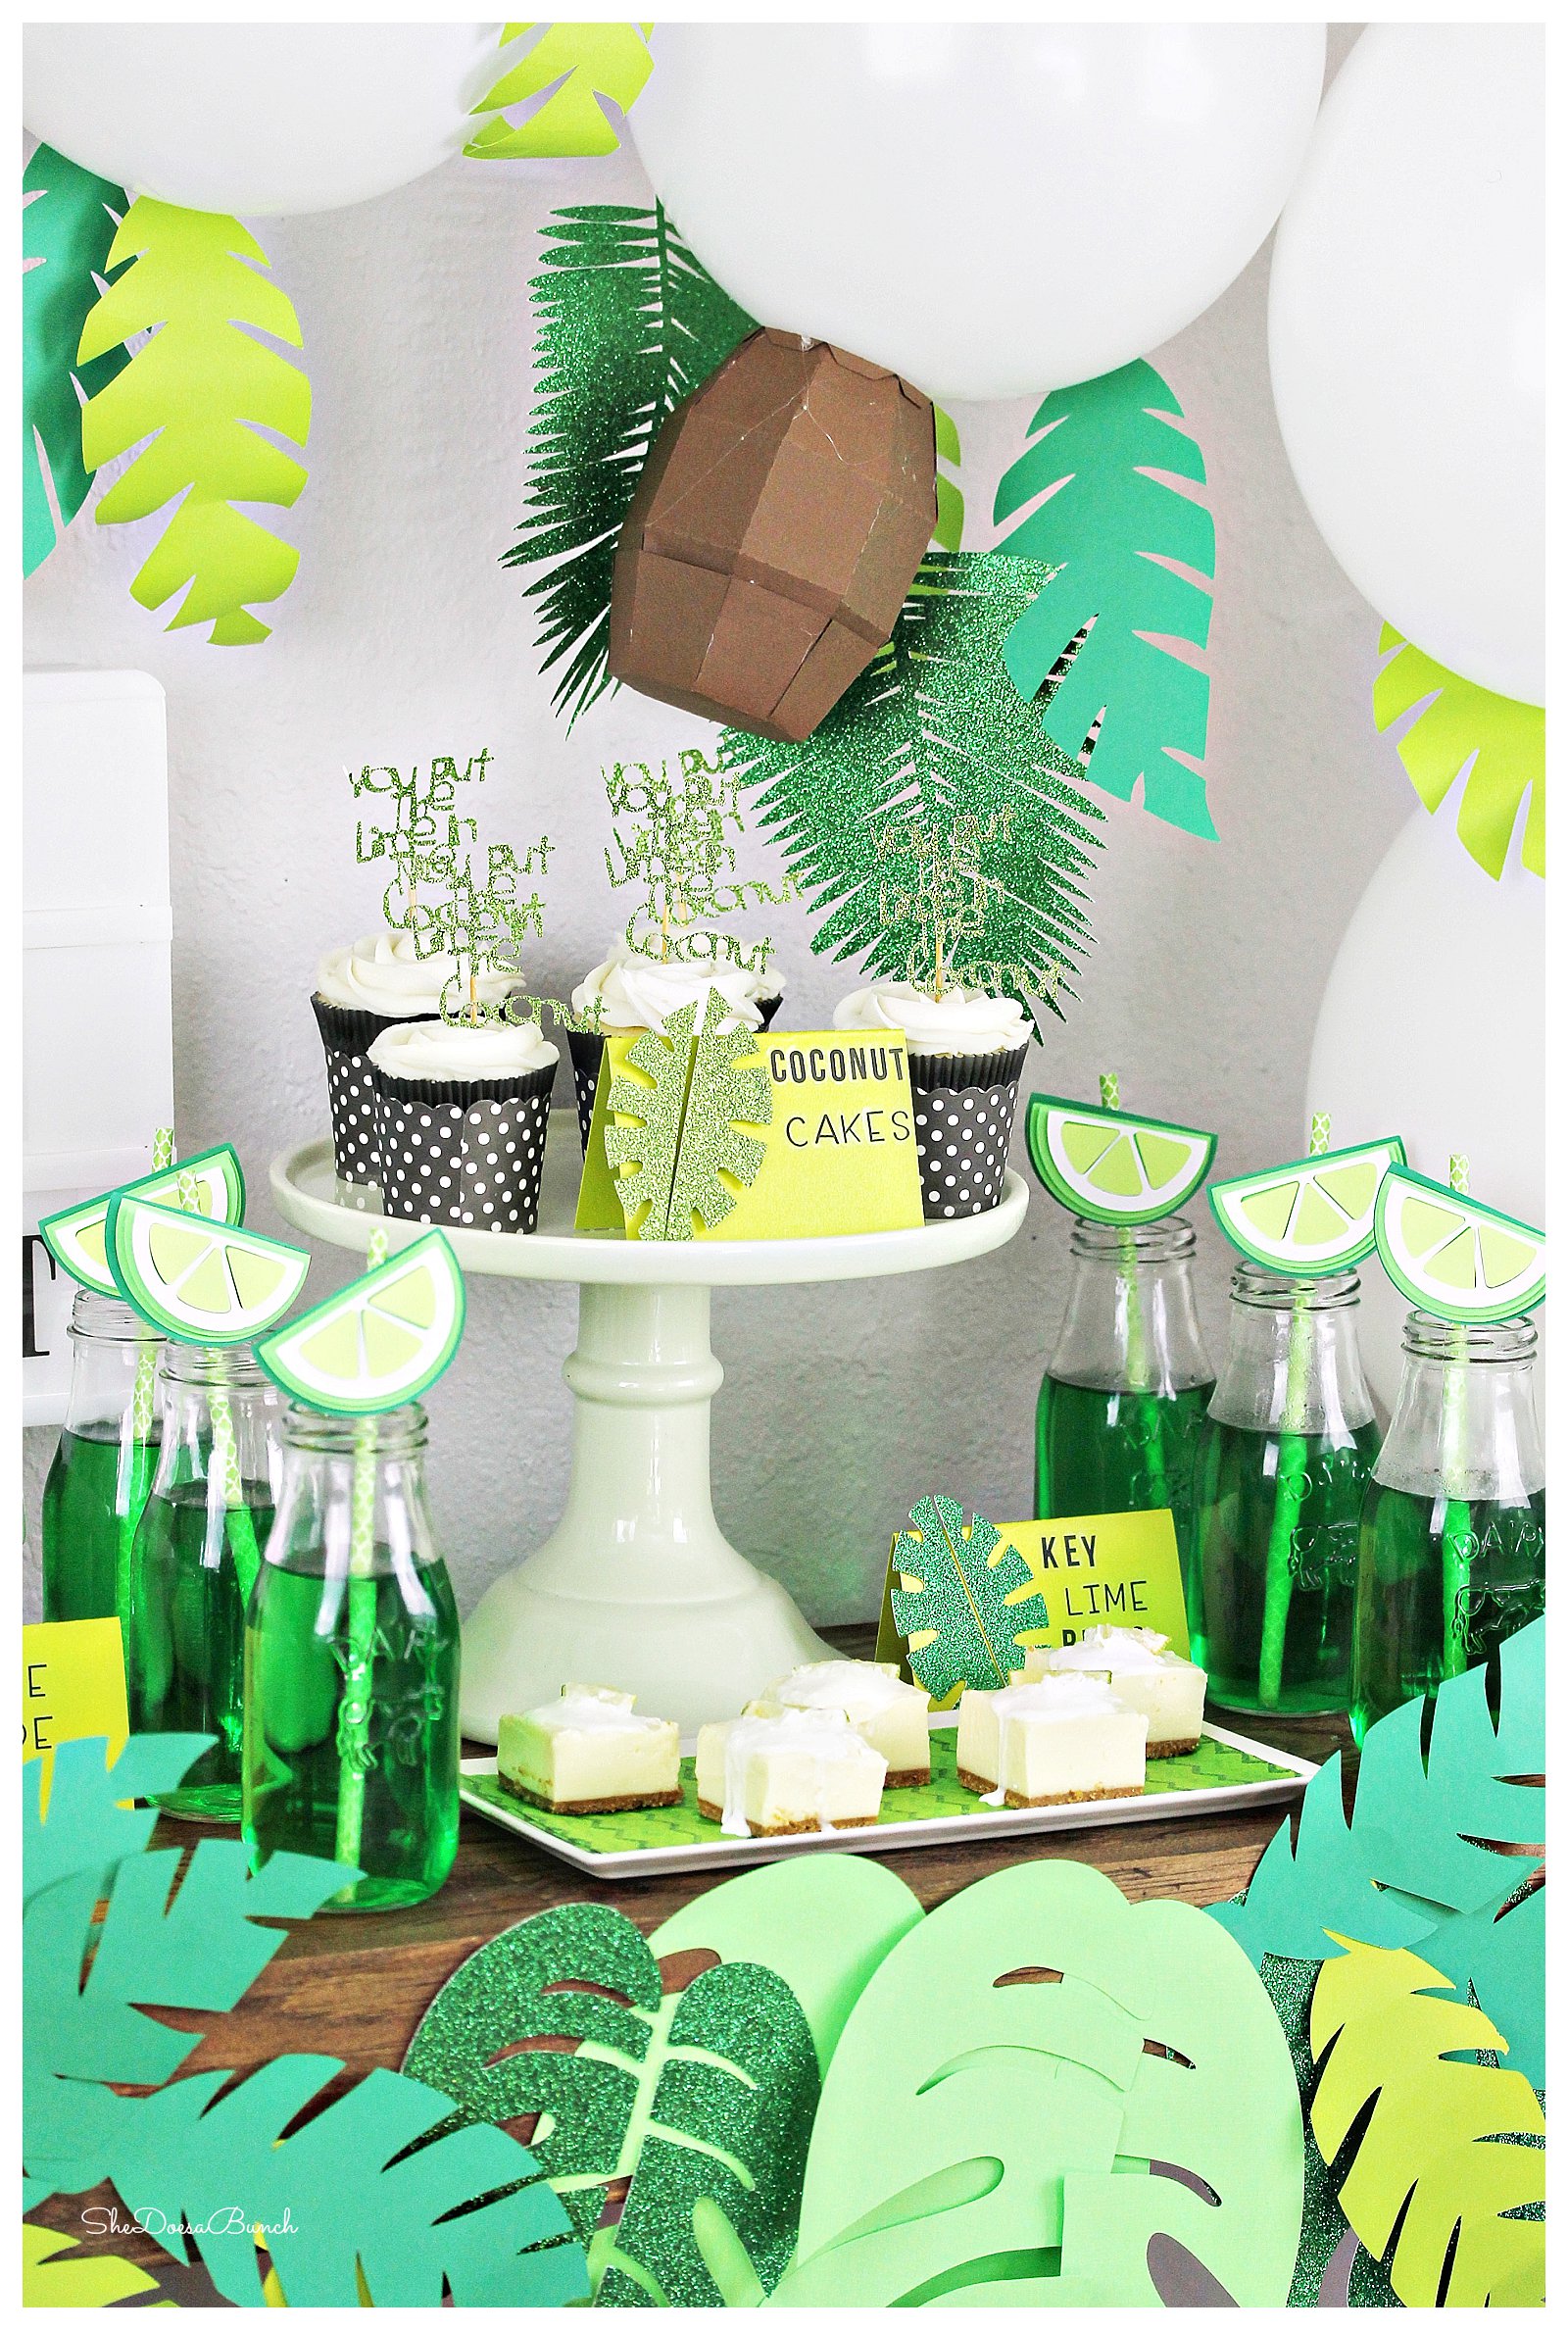 Lime In The Coconut Dessert Table